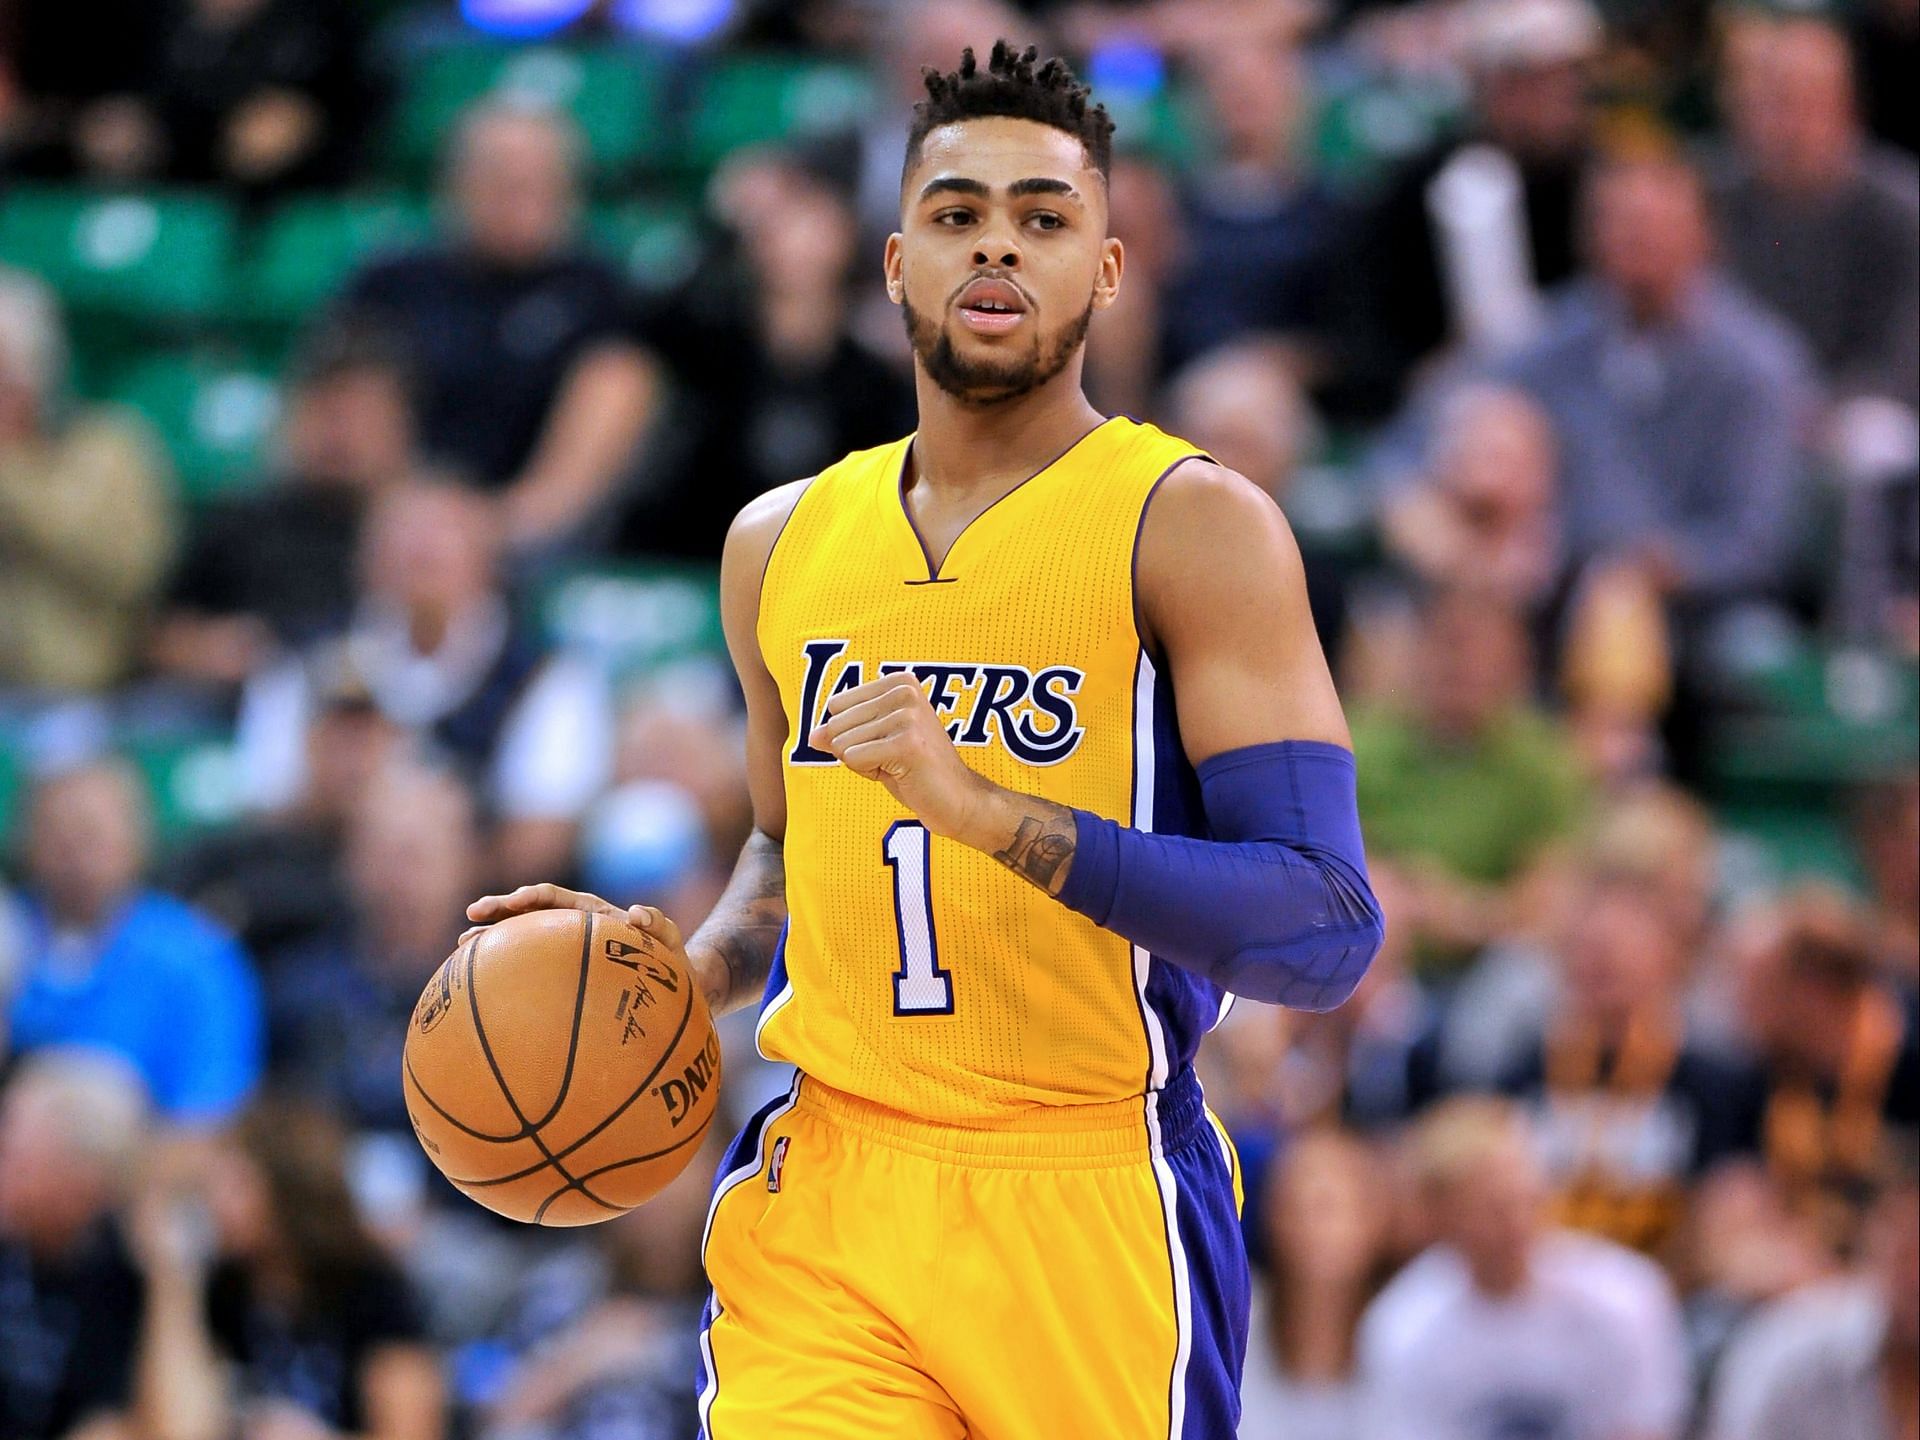 Lakers' D'Angelo Russell might have found a home in his second